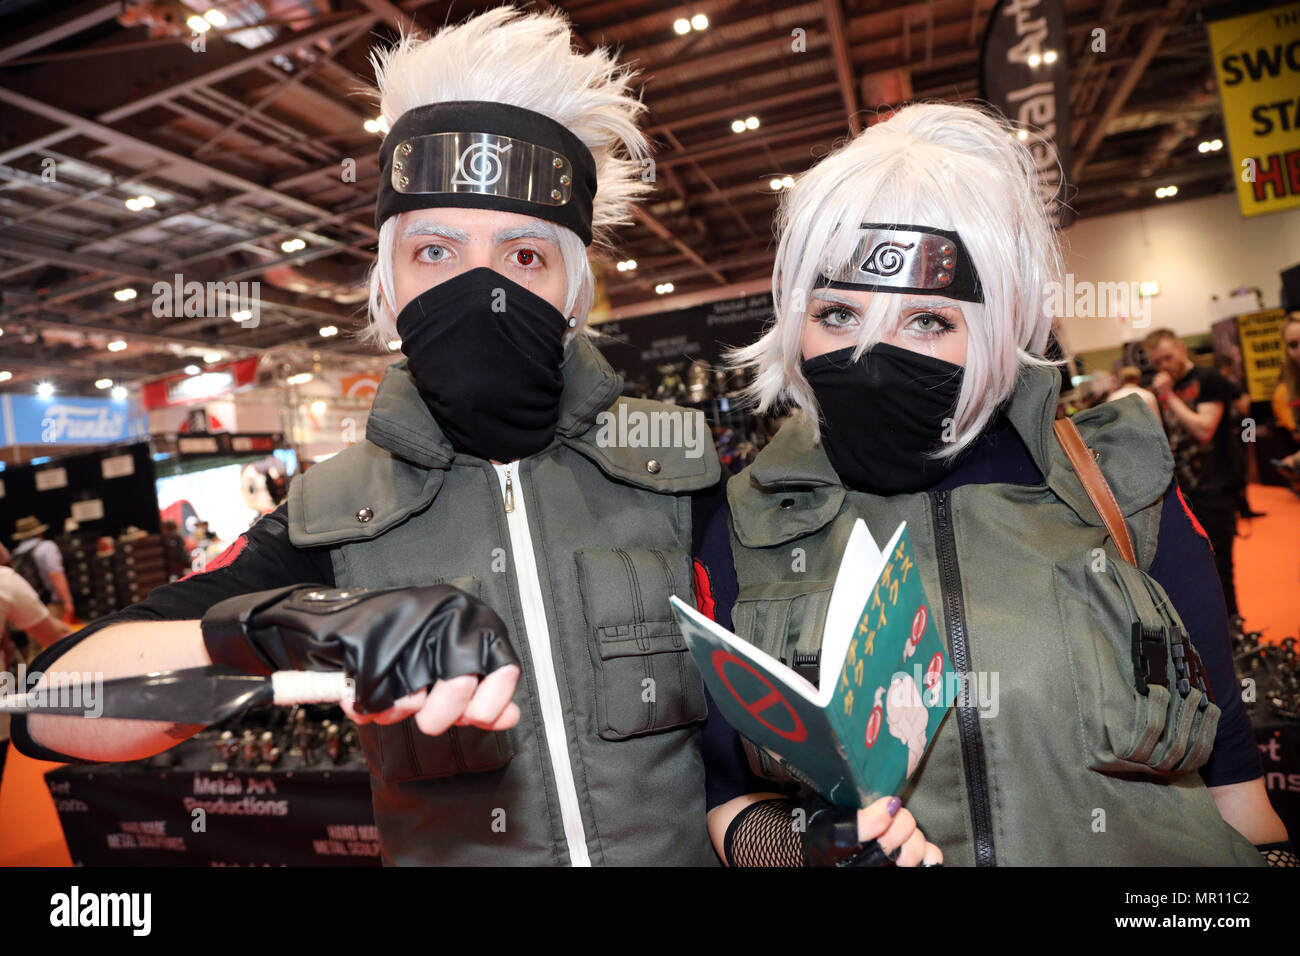 Participant dressed as characters from Naruto at the MCM Comic Con London festival at Excel in London, England Credit: Paul Brown/Alamy Live News Stock Photo